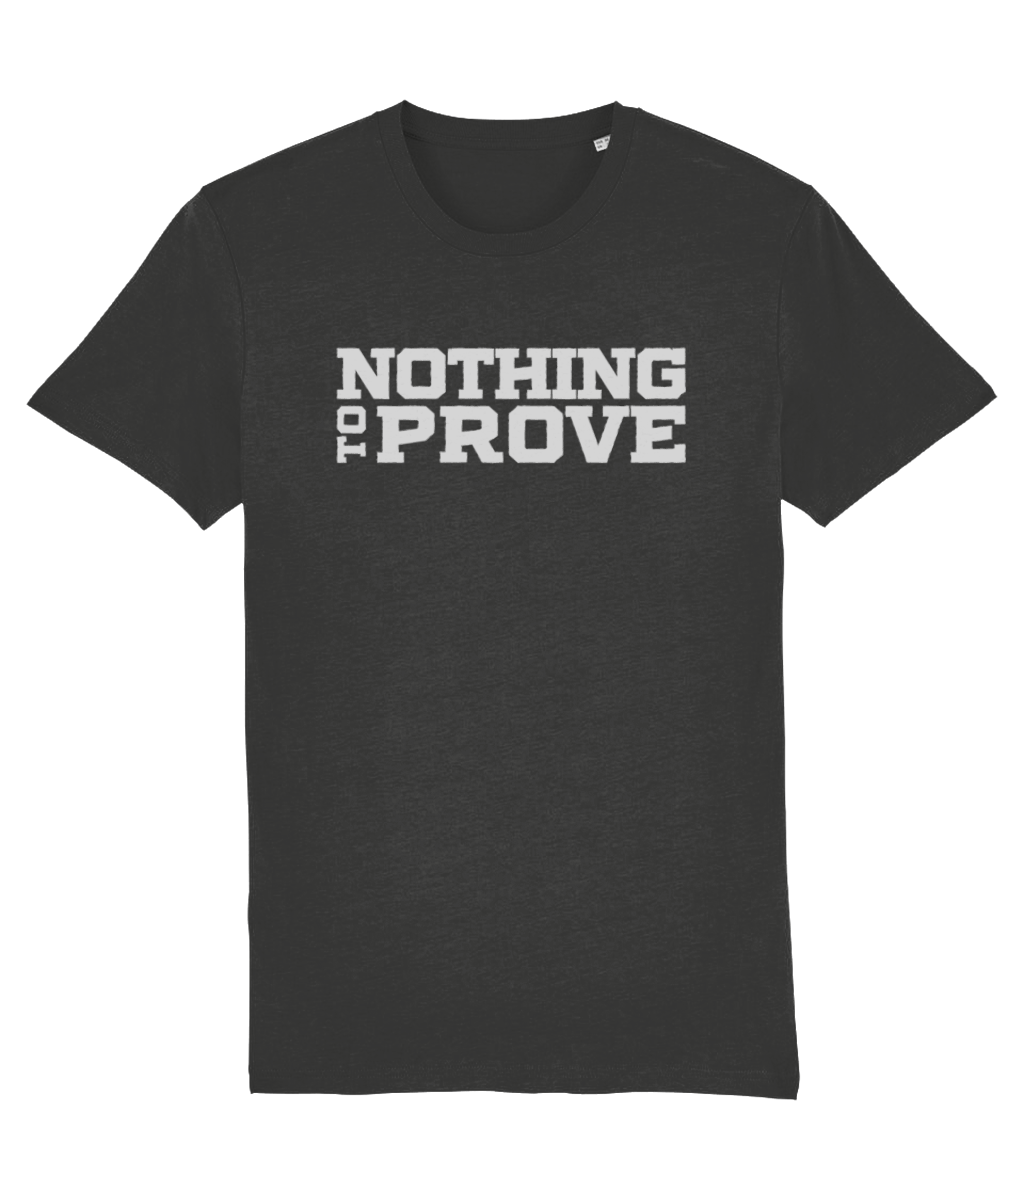 Dark grey variant of the Nothing to Prove T-Shirt